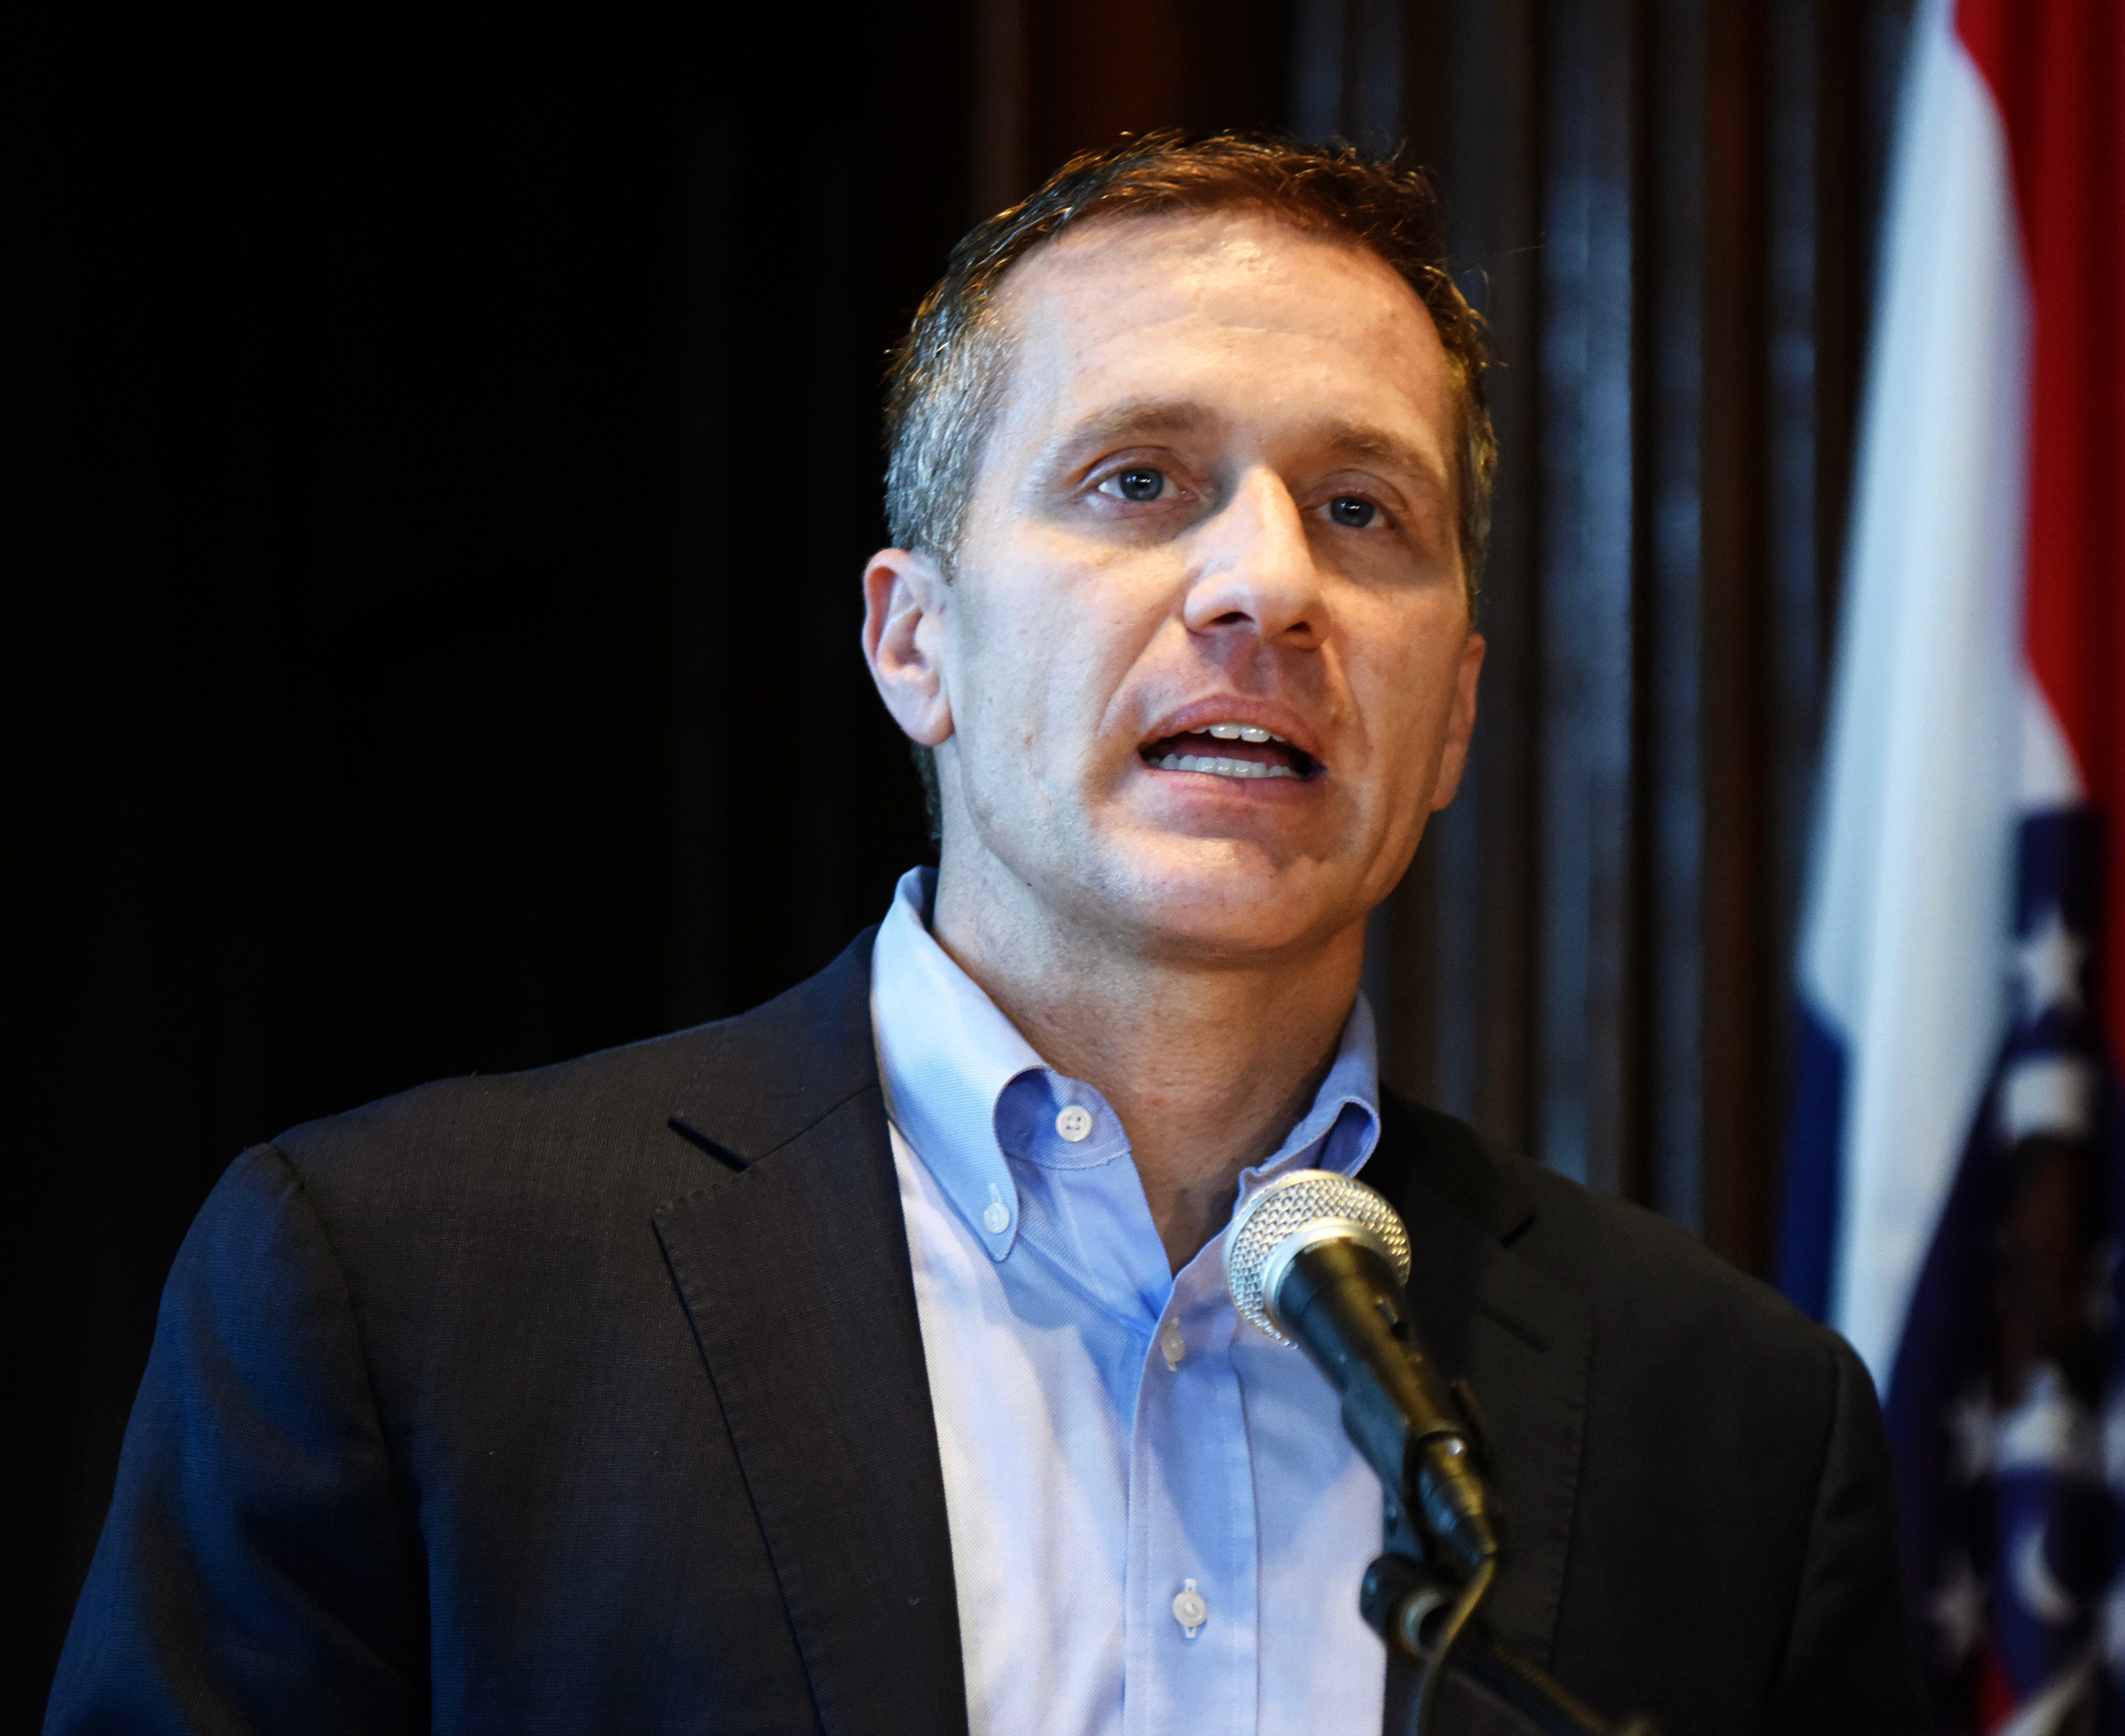 PHOTO: Missouri Gov. Eric Greitens speaks at a news conference in Jefferson City, Mo., about allegations related to his extramarital affair with his hairdresser, April 11, 2018.